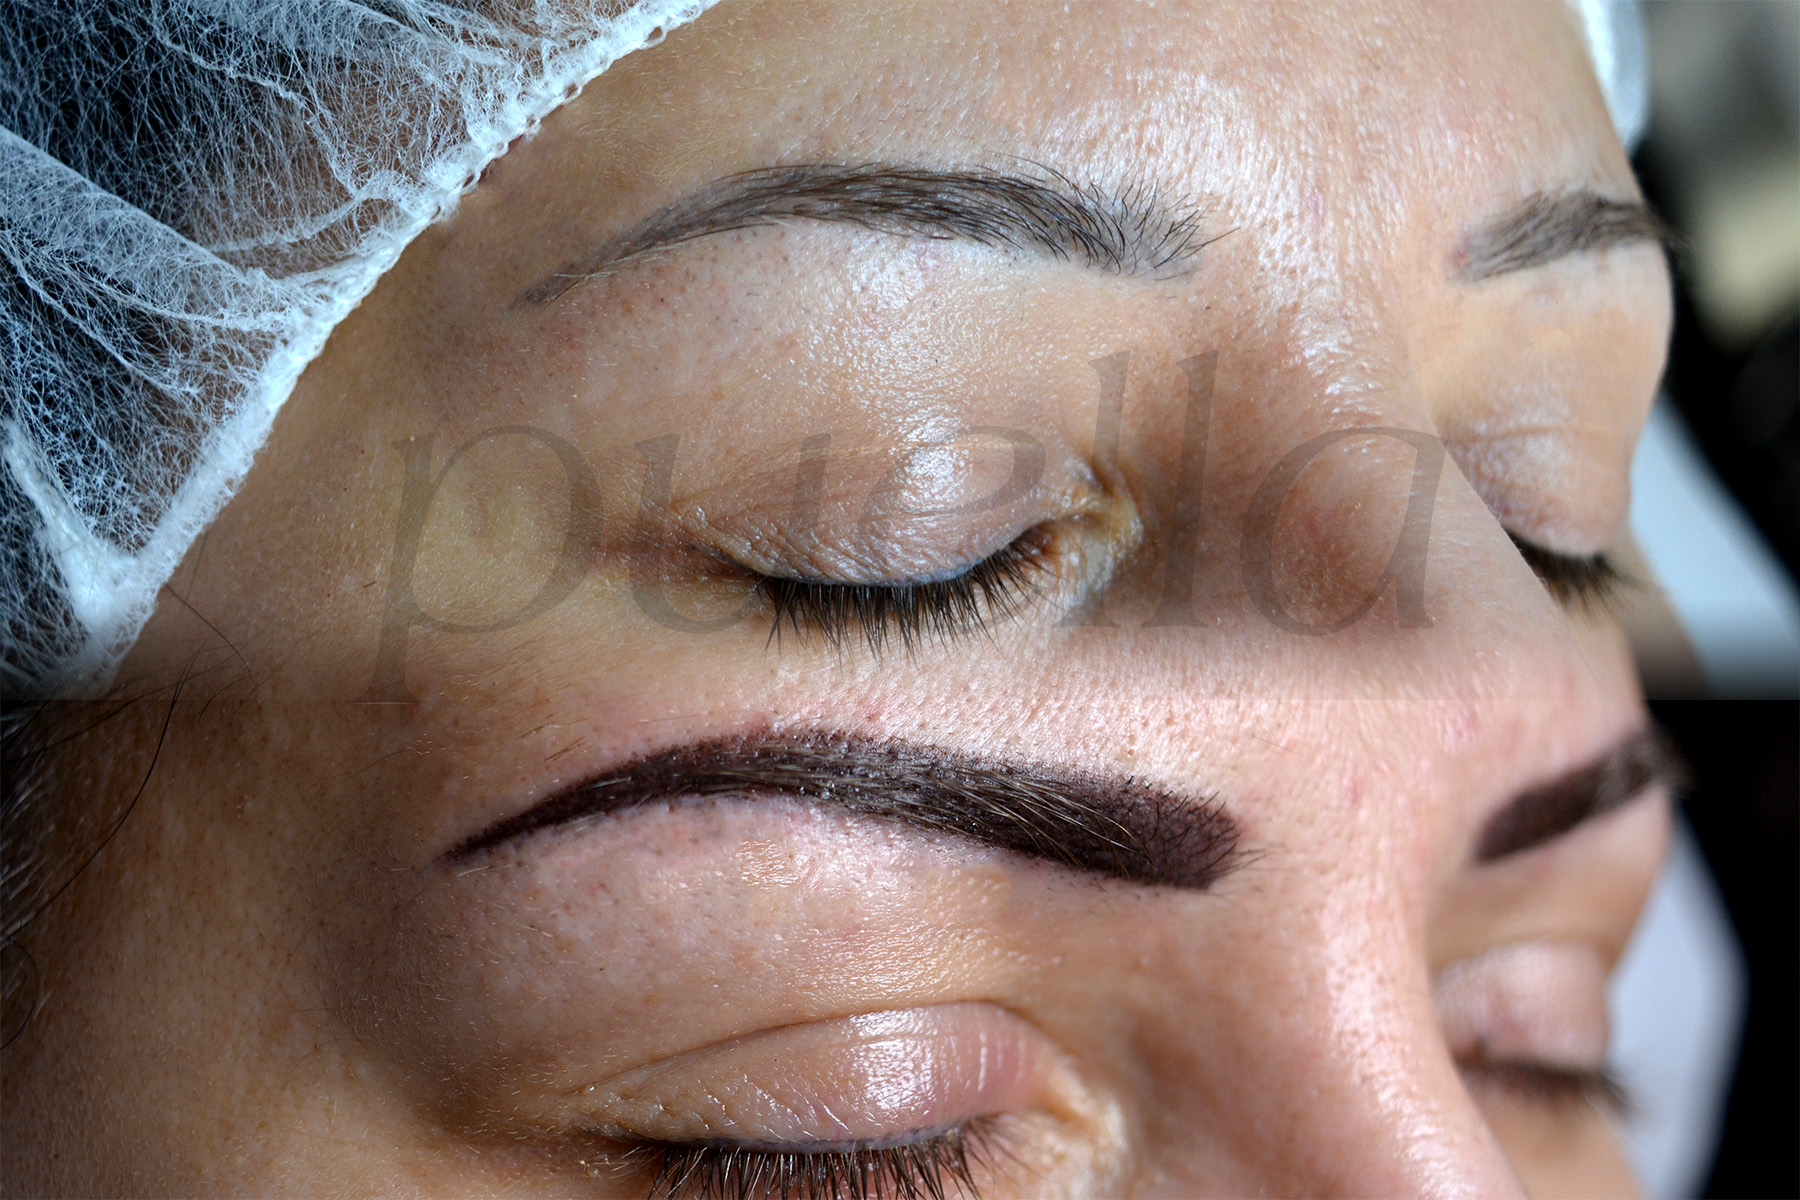 Permanent makeup by Puella Beauty - eyebrows before and after image